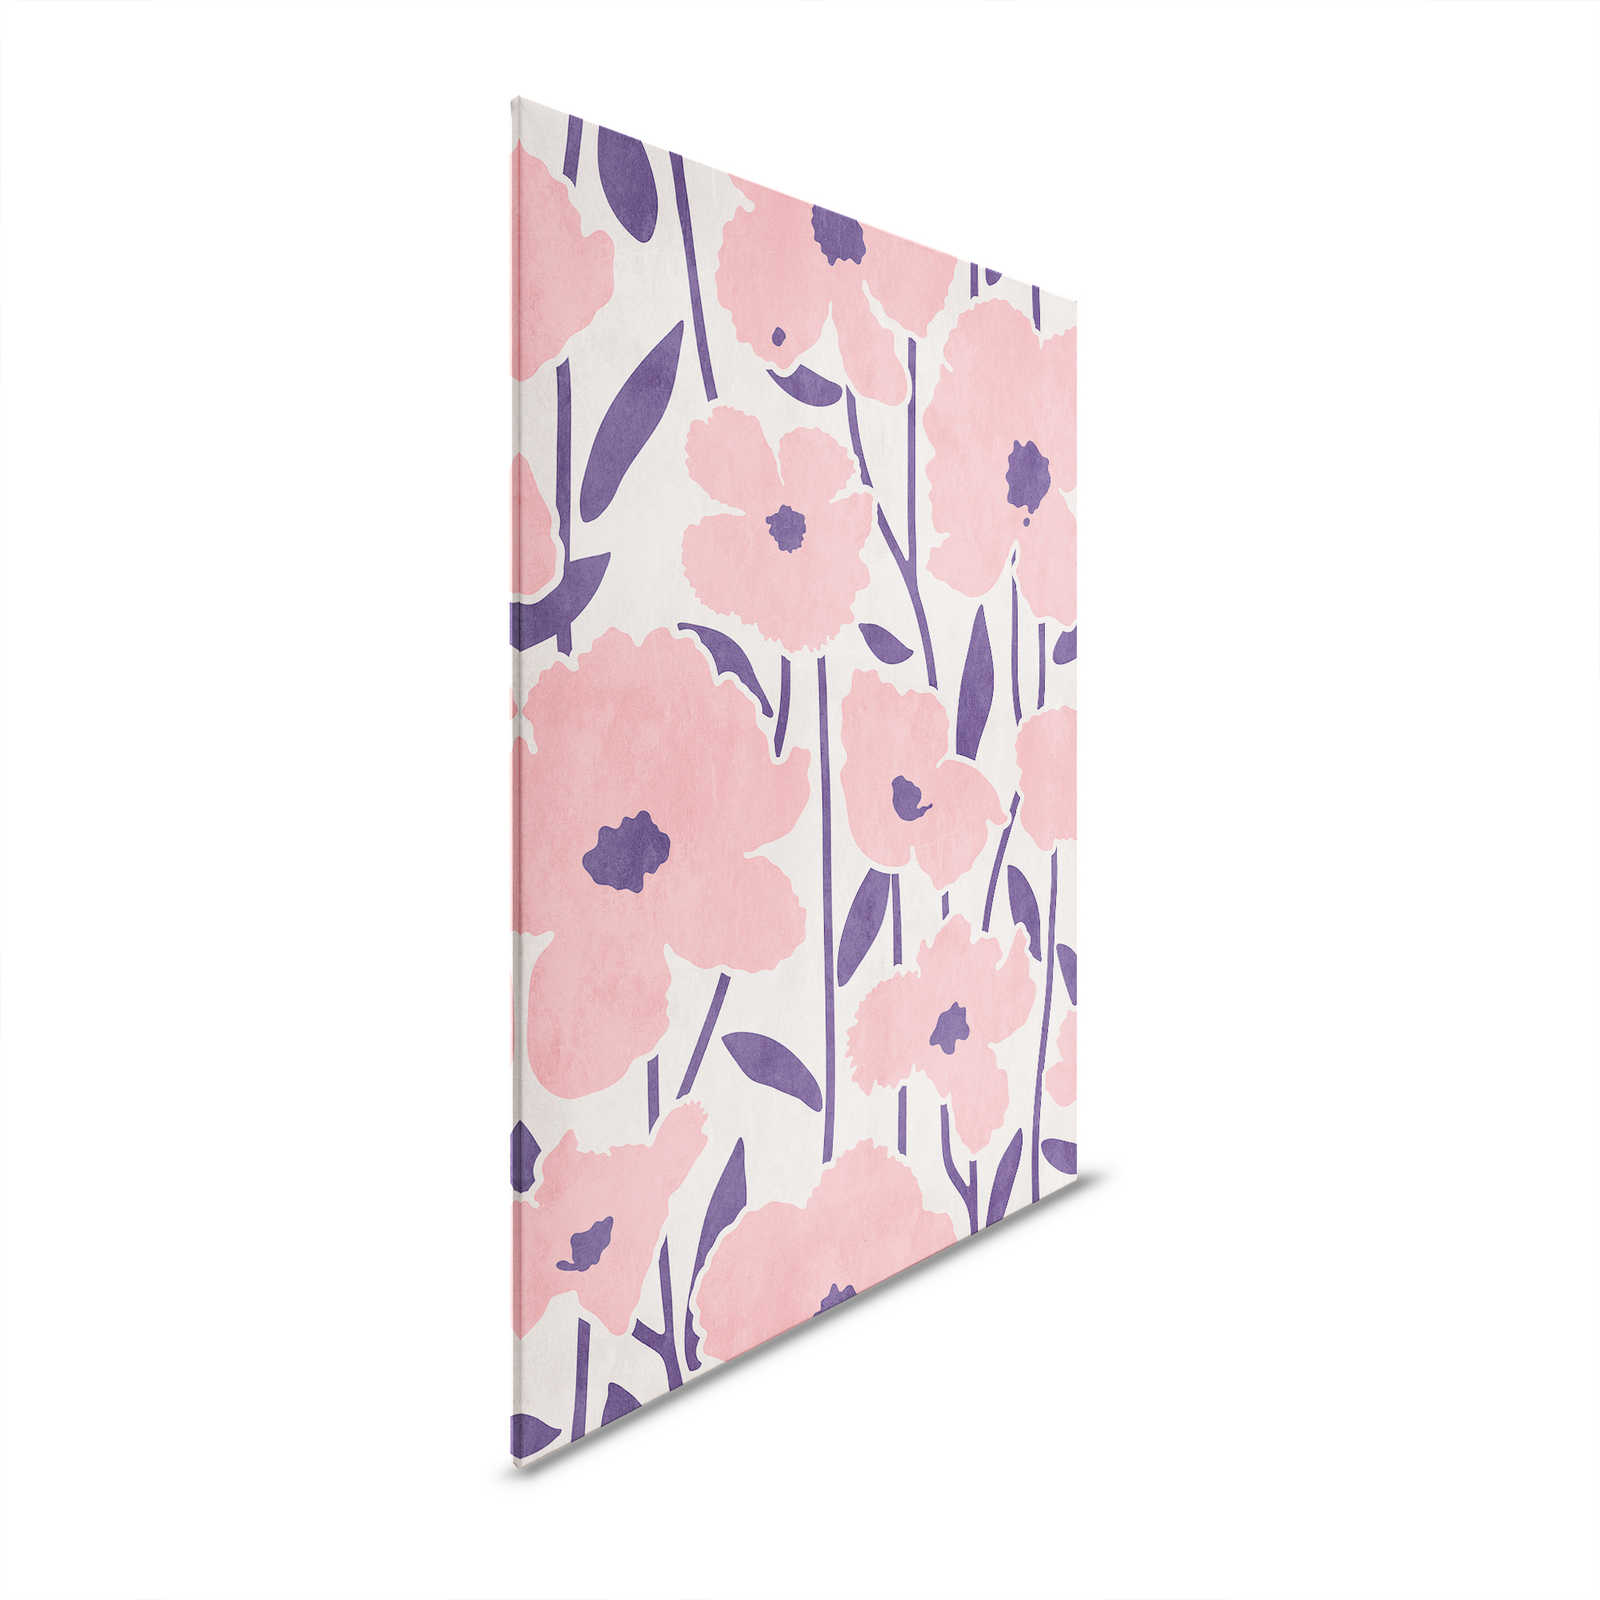 Flower Market 1 - Floral Canvas Painting Pink Flowers Pattern & Rendering - 0.80 m x 1.20 m
